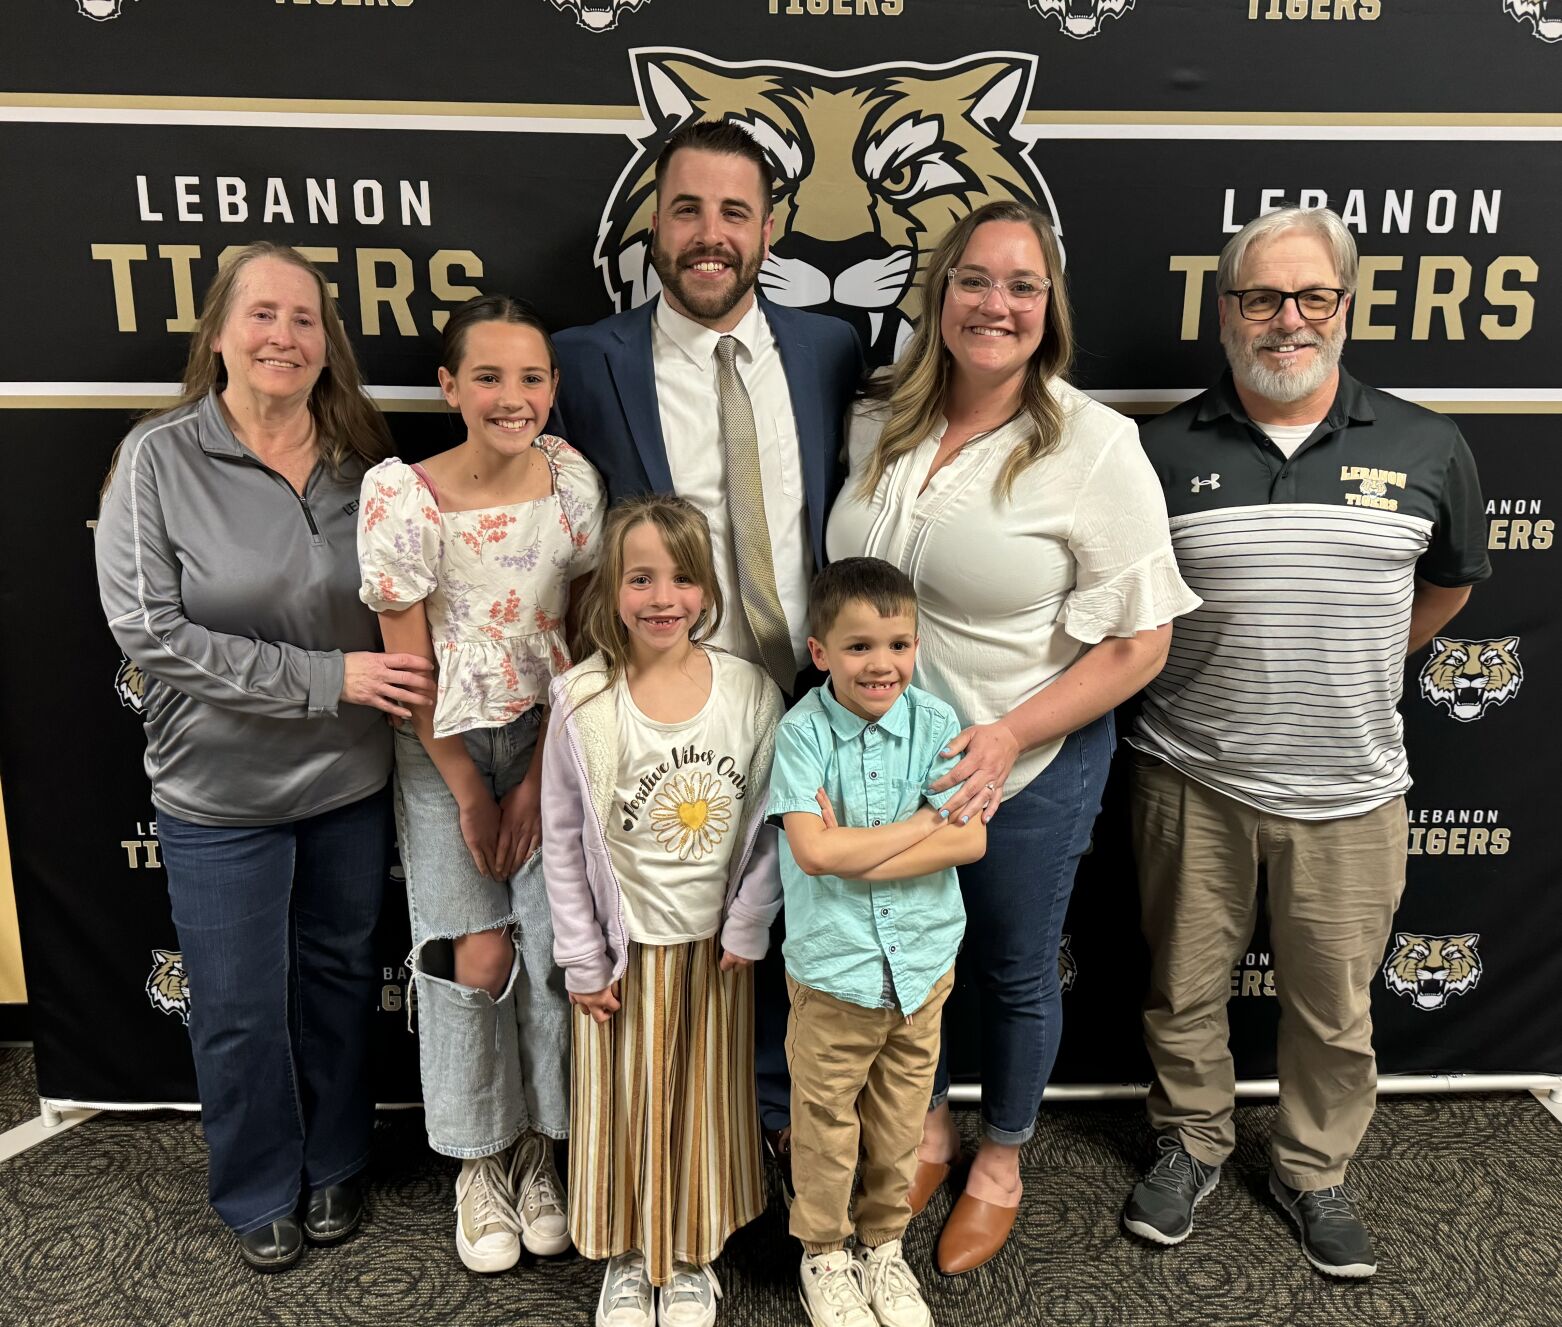 Aaron Vaughn appointed as head coach of Lebanon Lady Tigers